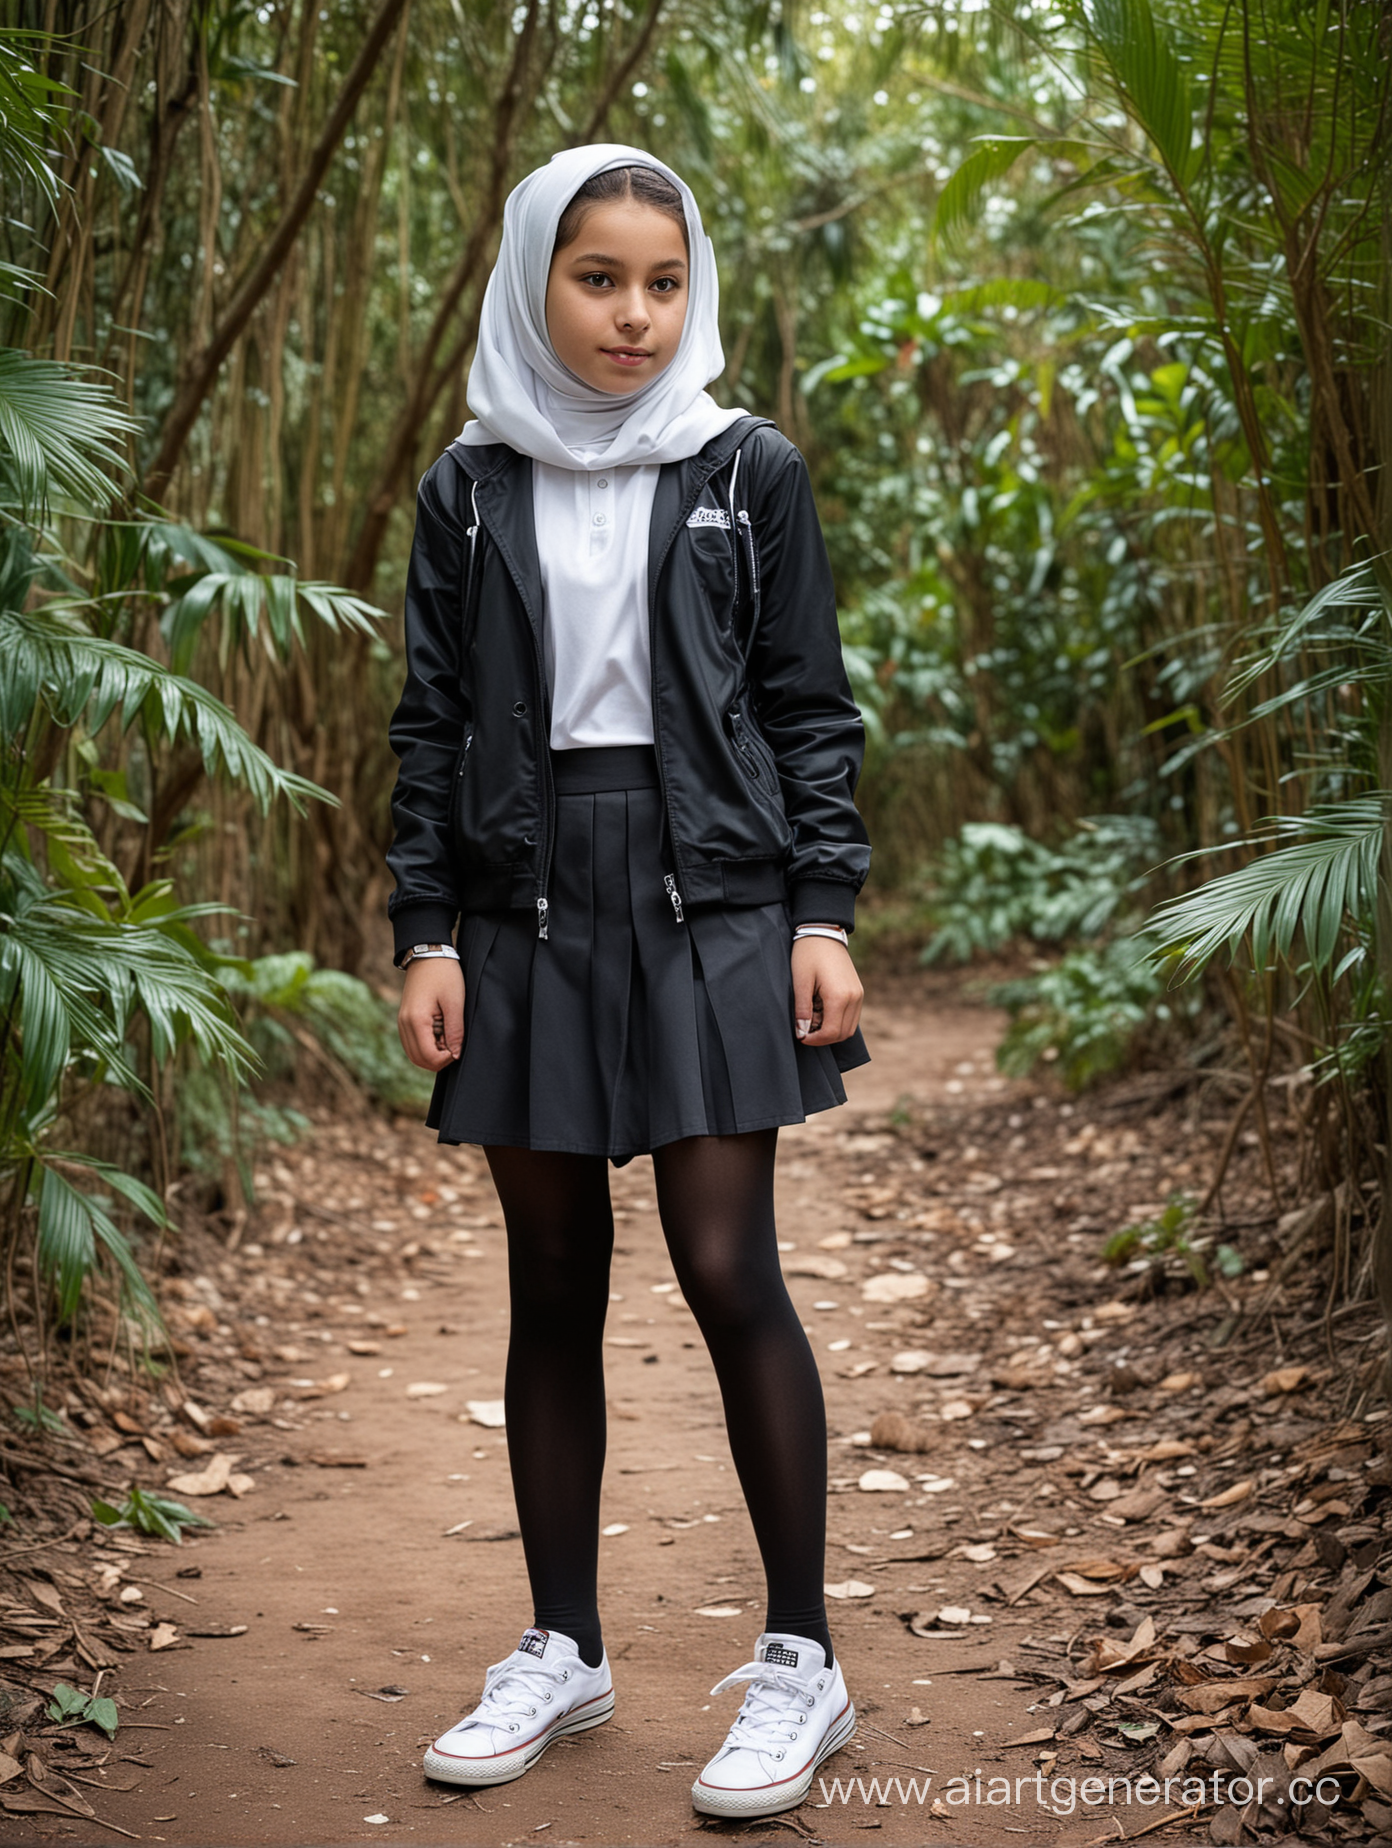 A little girl, 12 years old, jilbab, school skirt, white converse shoes, school uniform, black opaque tights, standing in the jungle, from side, top view, turkish, hairless, petite body, hooded jacket, 